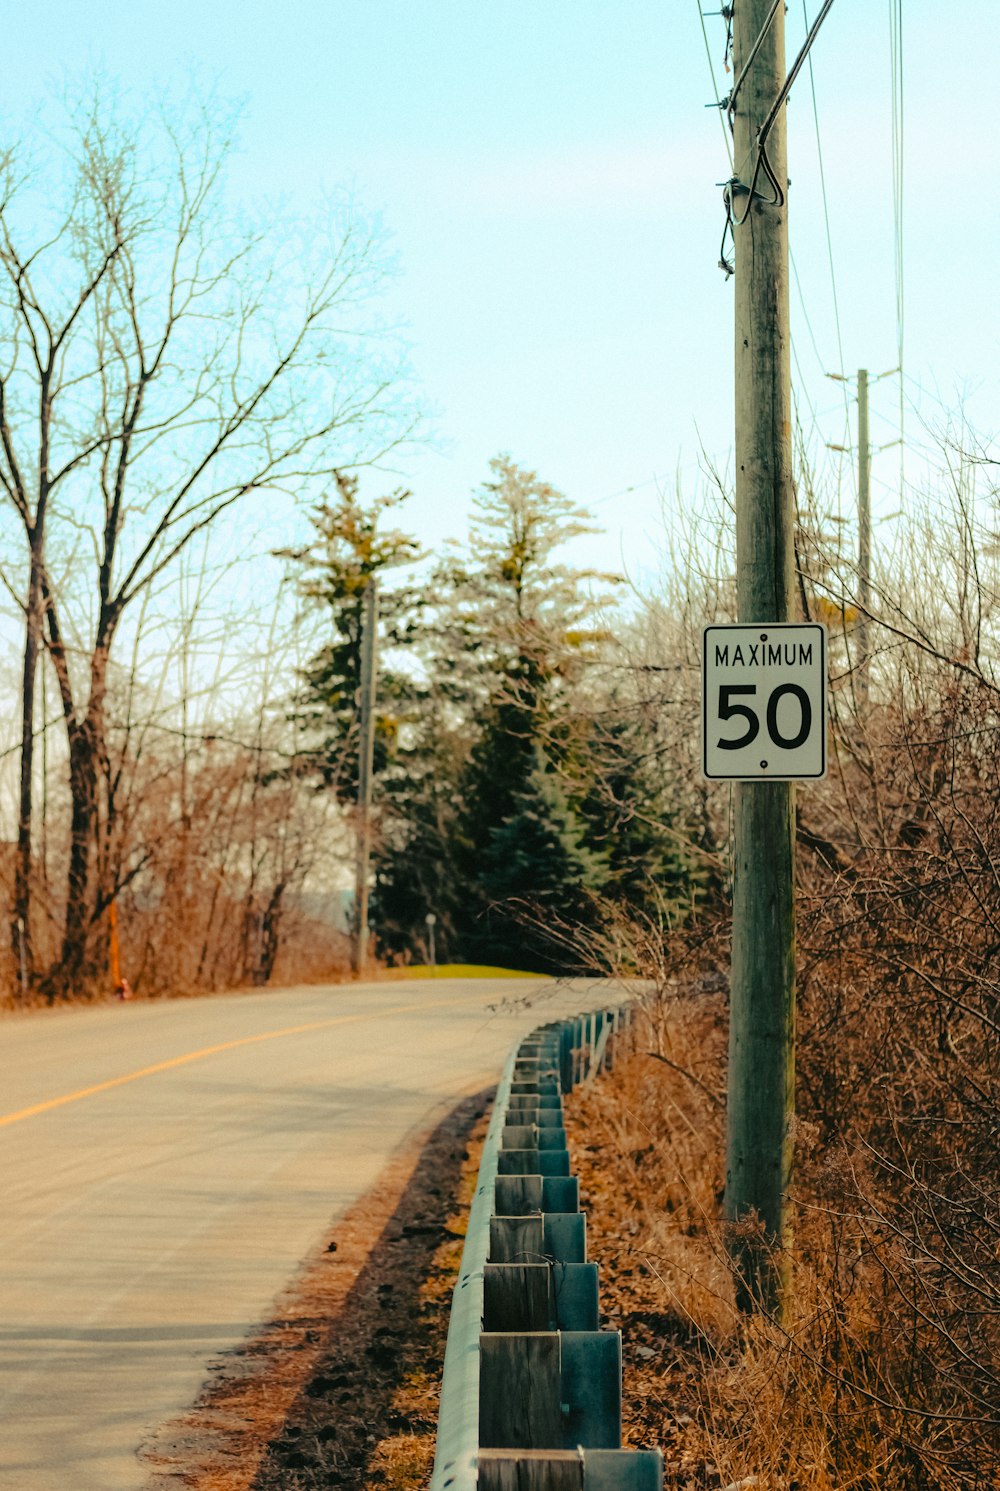 a speed limit sign on the side of a road